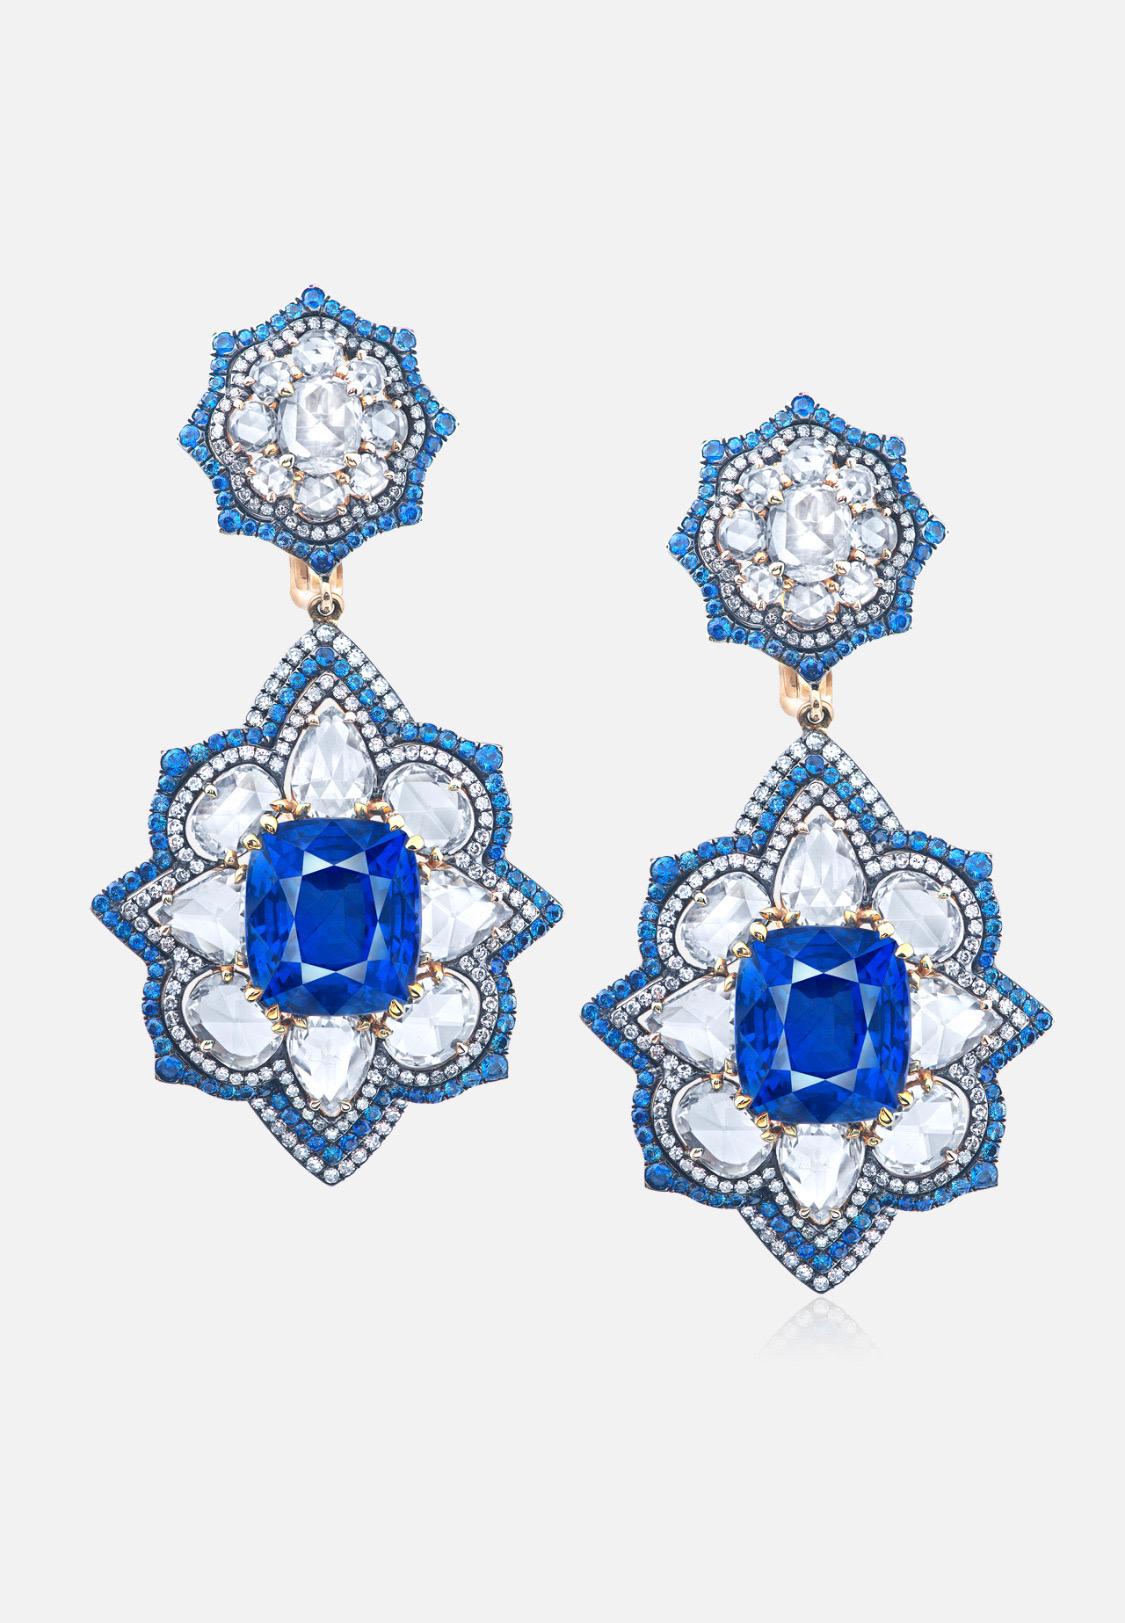 From Emilio Jewelry, a well known and respected wholesaler/dealer located on New York’s iconic Fifth Avenue, 
Finding one untreated sapphire of this size is very difficult, imagine a matching pair! This is a truly special and unique earring. Fall in